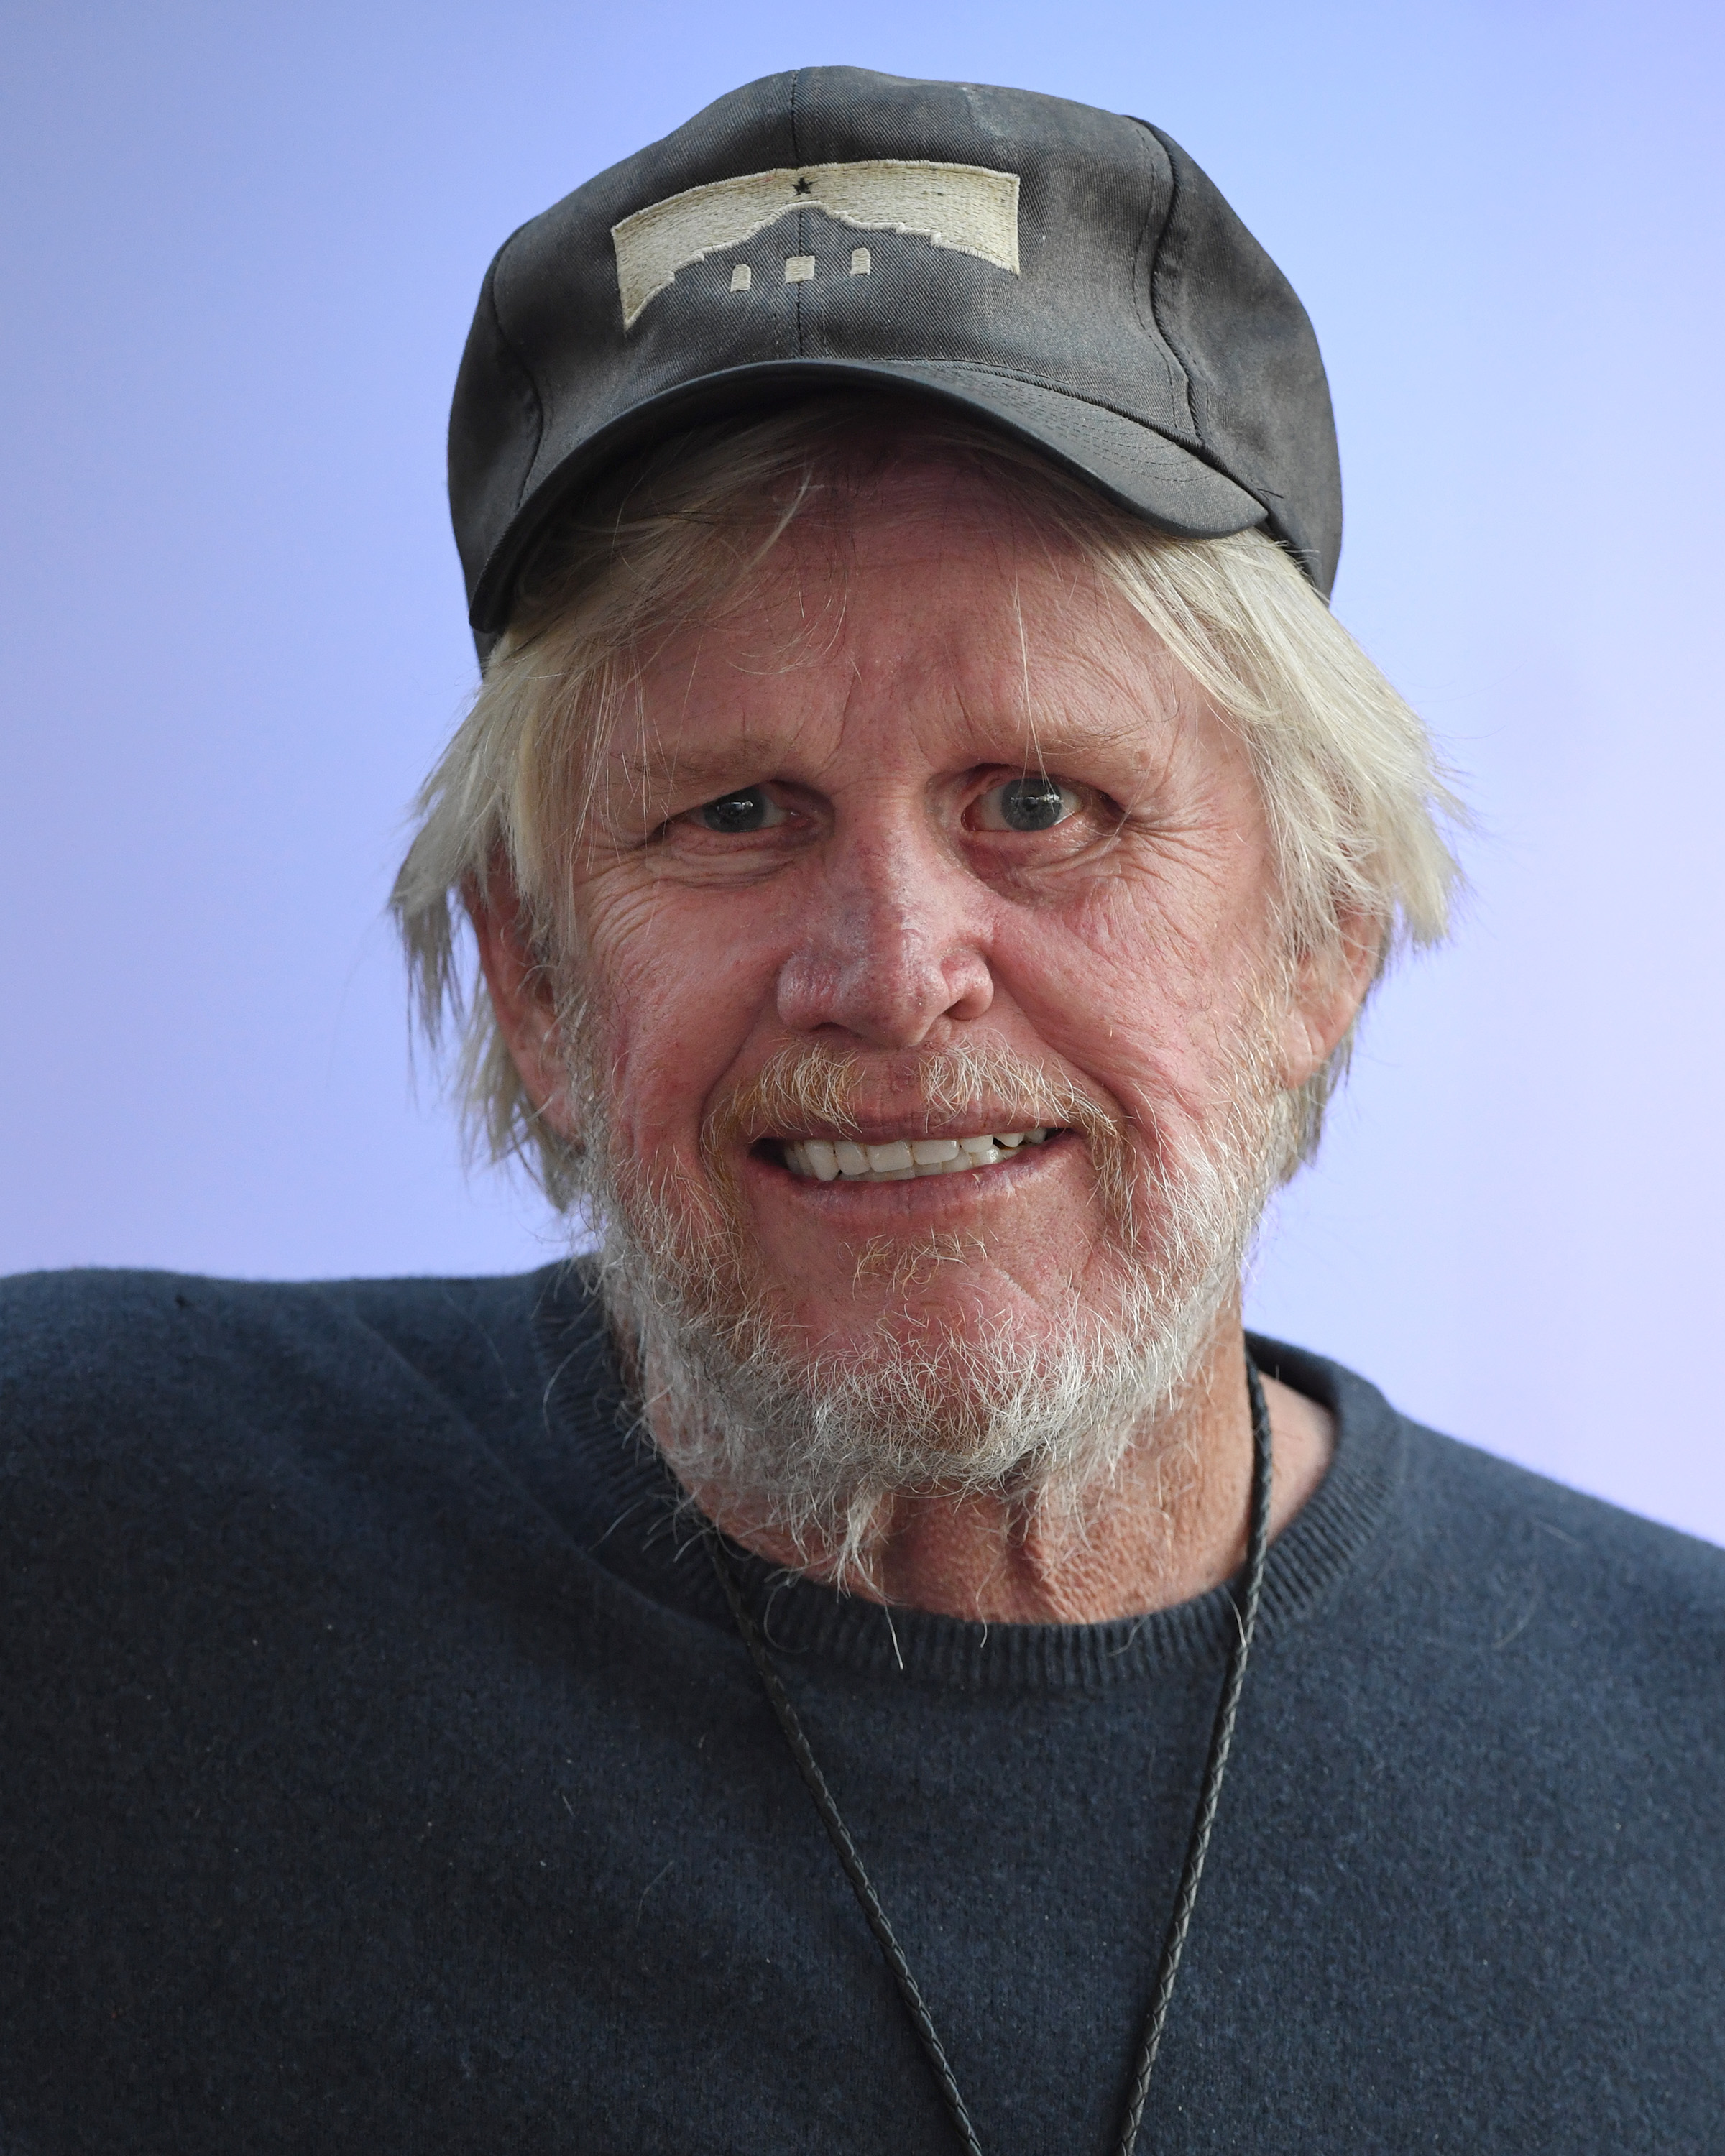 Gary Busey pictured at The Comedy Chateau on May 12, 2021 in North Hollywood, California. | Source: Getty Images